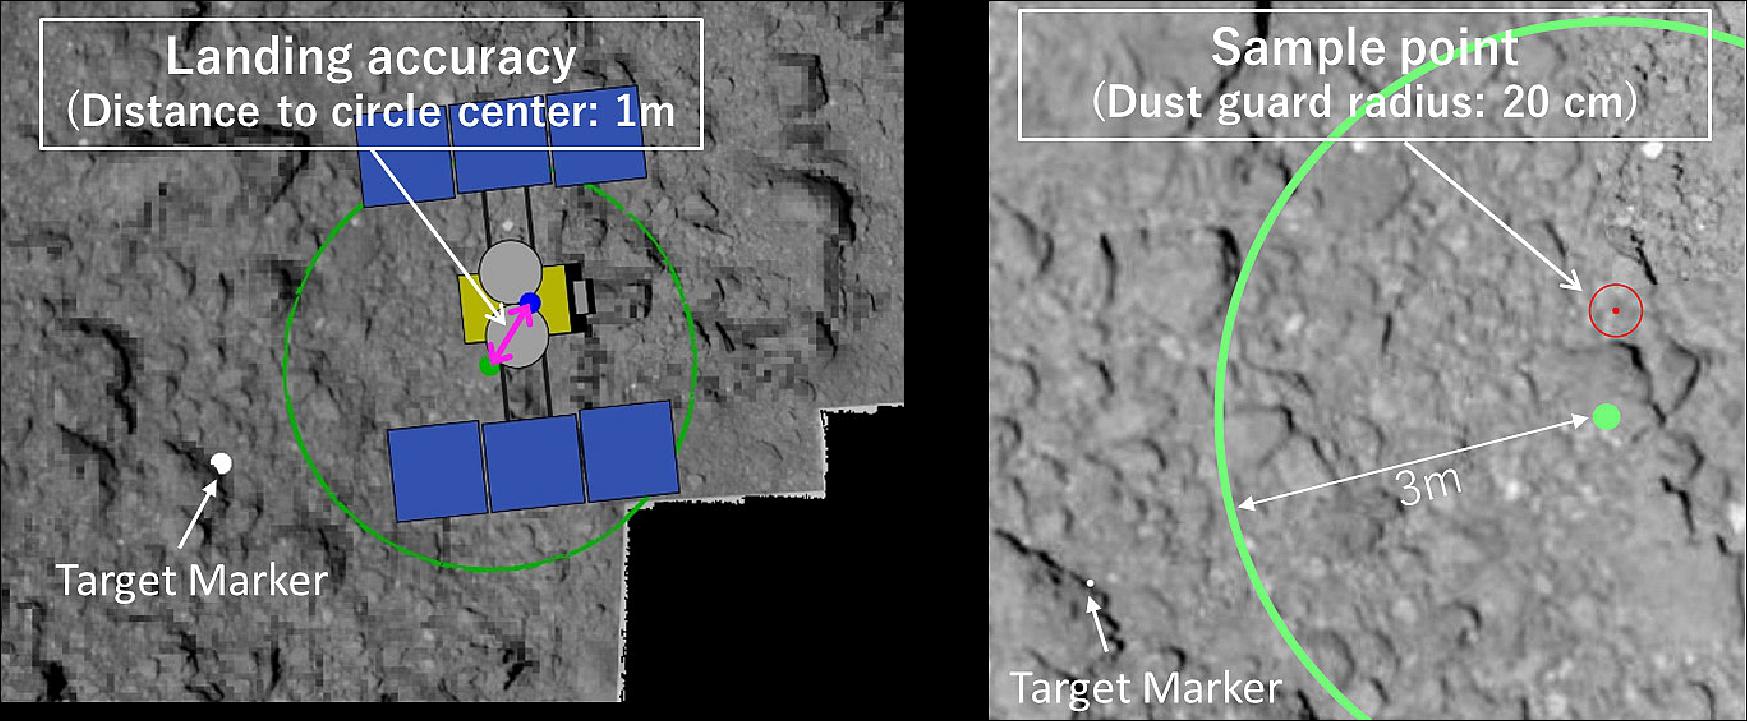 Figure 44: Post analysis result of the touchdown accuracy (left), and the sample point (right) for TD1-L08E1 operation (image credit: Hayabusa-2 Team)